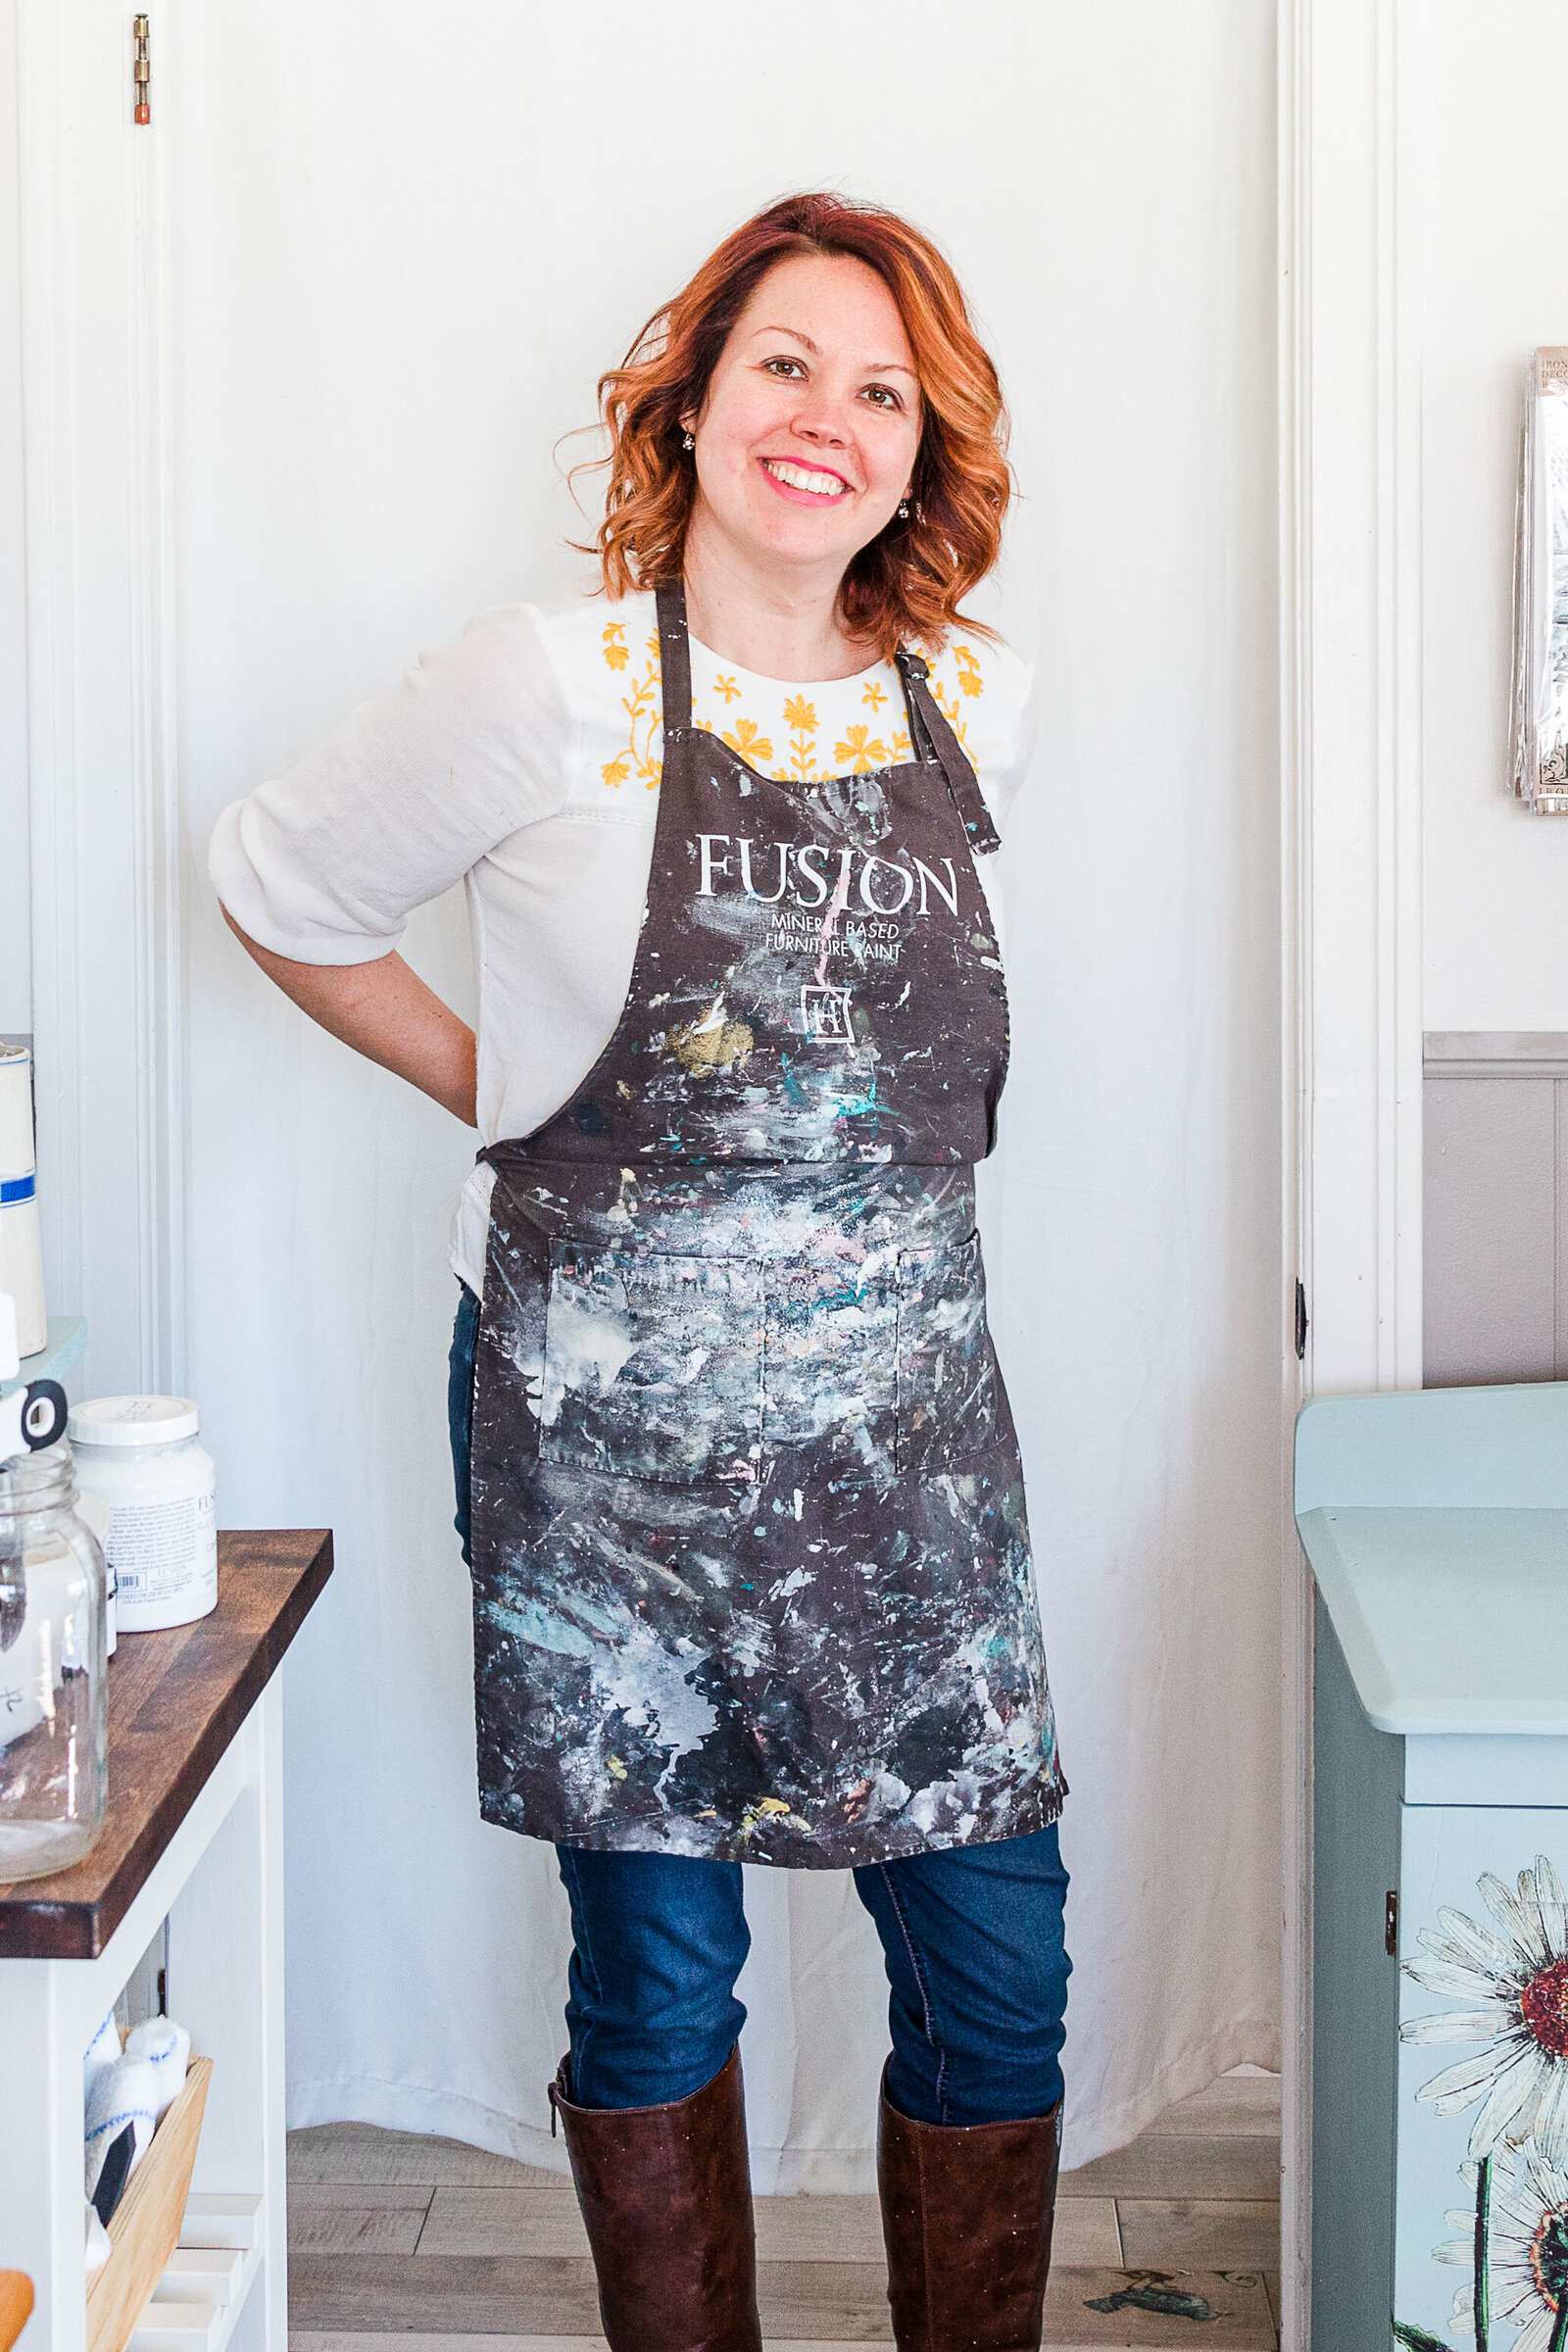 Uptique Boutique owner Janet Gilmour Tying Apron for Painting Furniture Fusion Paints Uptique Boutique Orillia Ontario Brand Photography by Linda Carnell Brand and Bloom